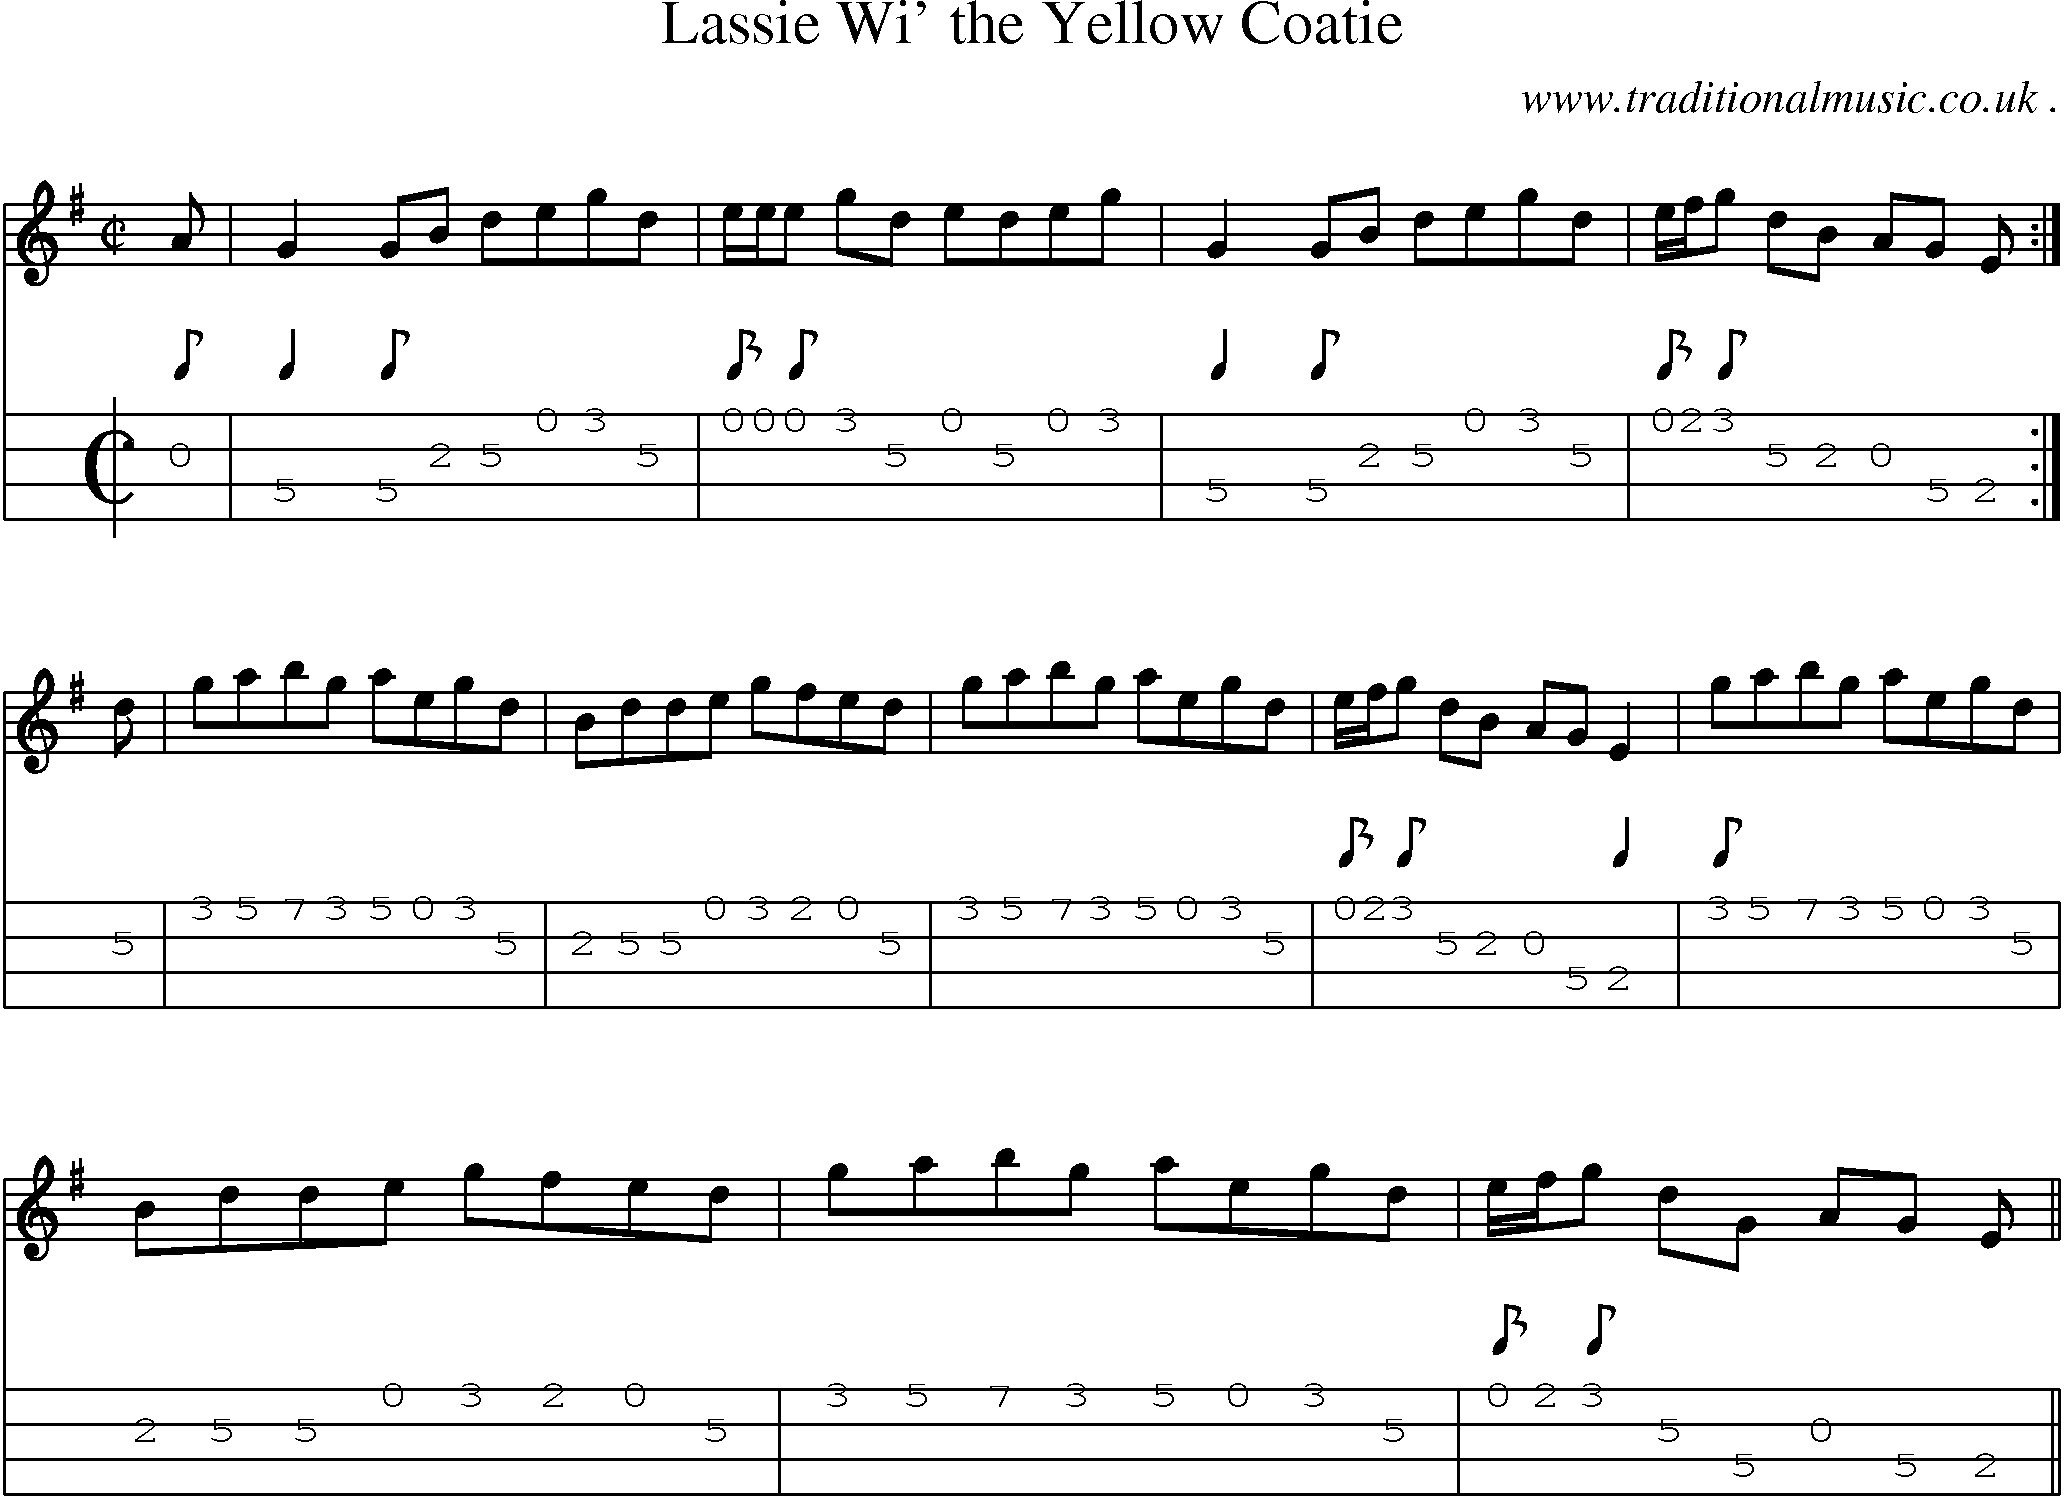 Sheet-music  score, Chords and Mandolin Tabs for Lassie Wi The Yellow Coatie